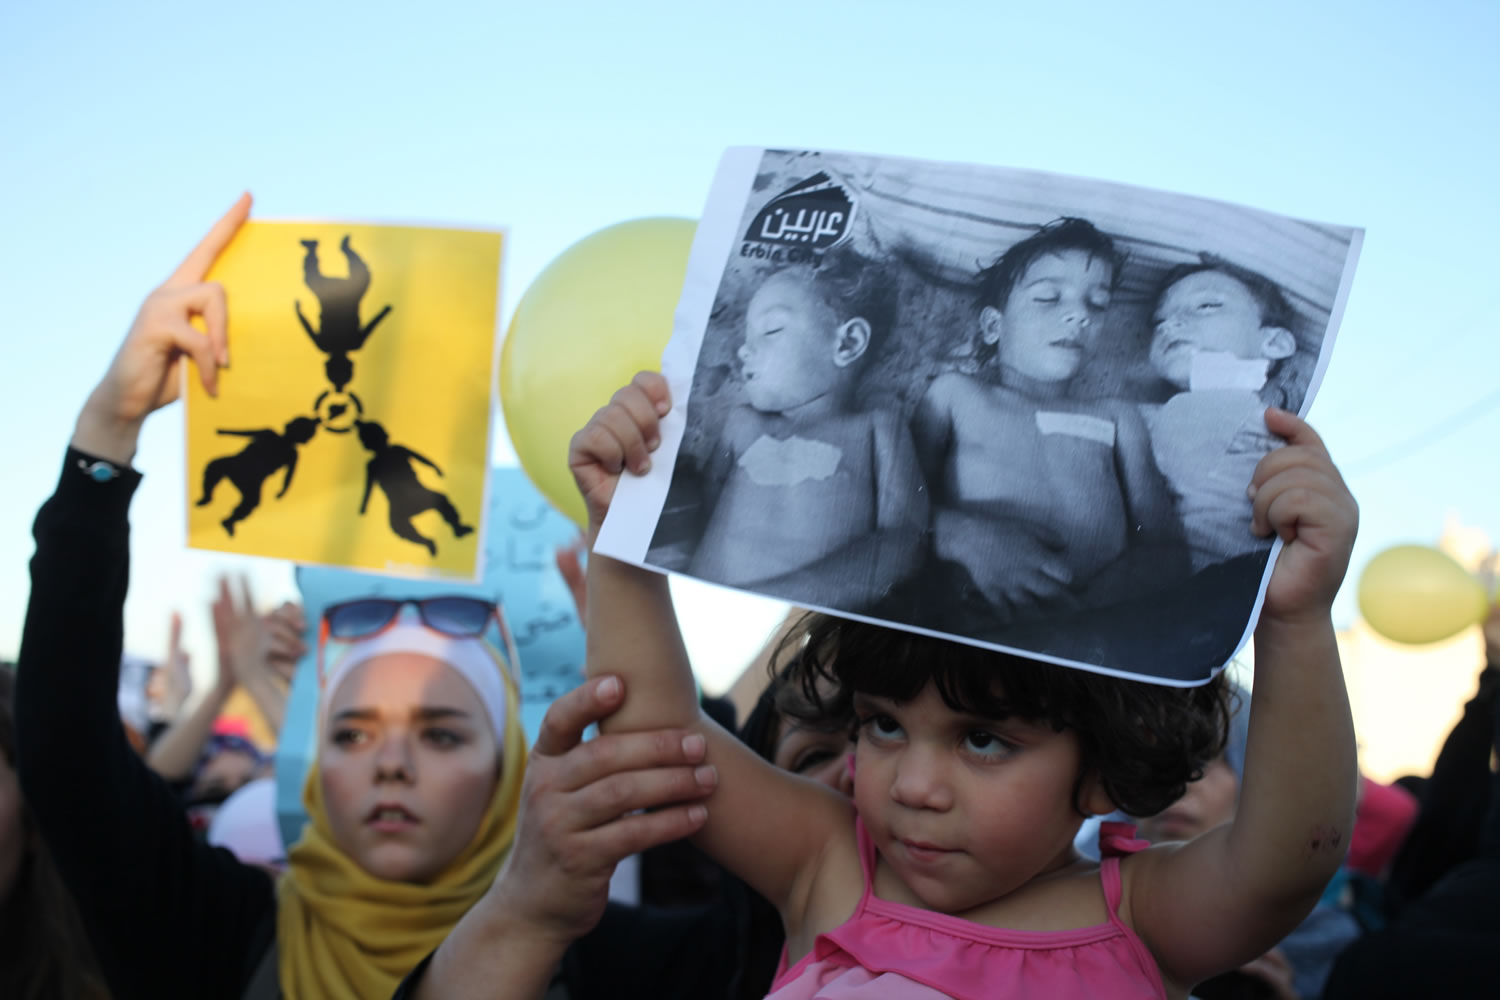 Syrian protesters carry placards showing dead Syrian children, during a protest in front of the Syrian embassy to condemn the alleged poison gas attack on the suburbs of Damascus during a protest in front of the Syrian embassy,  in Amman, Jordan, on Friday.